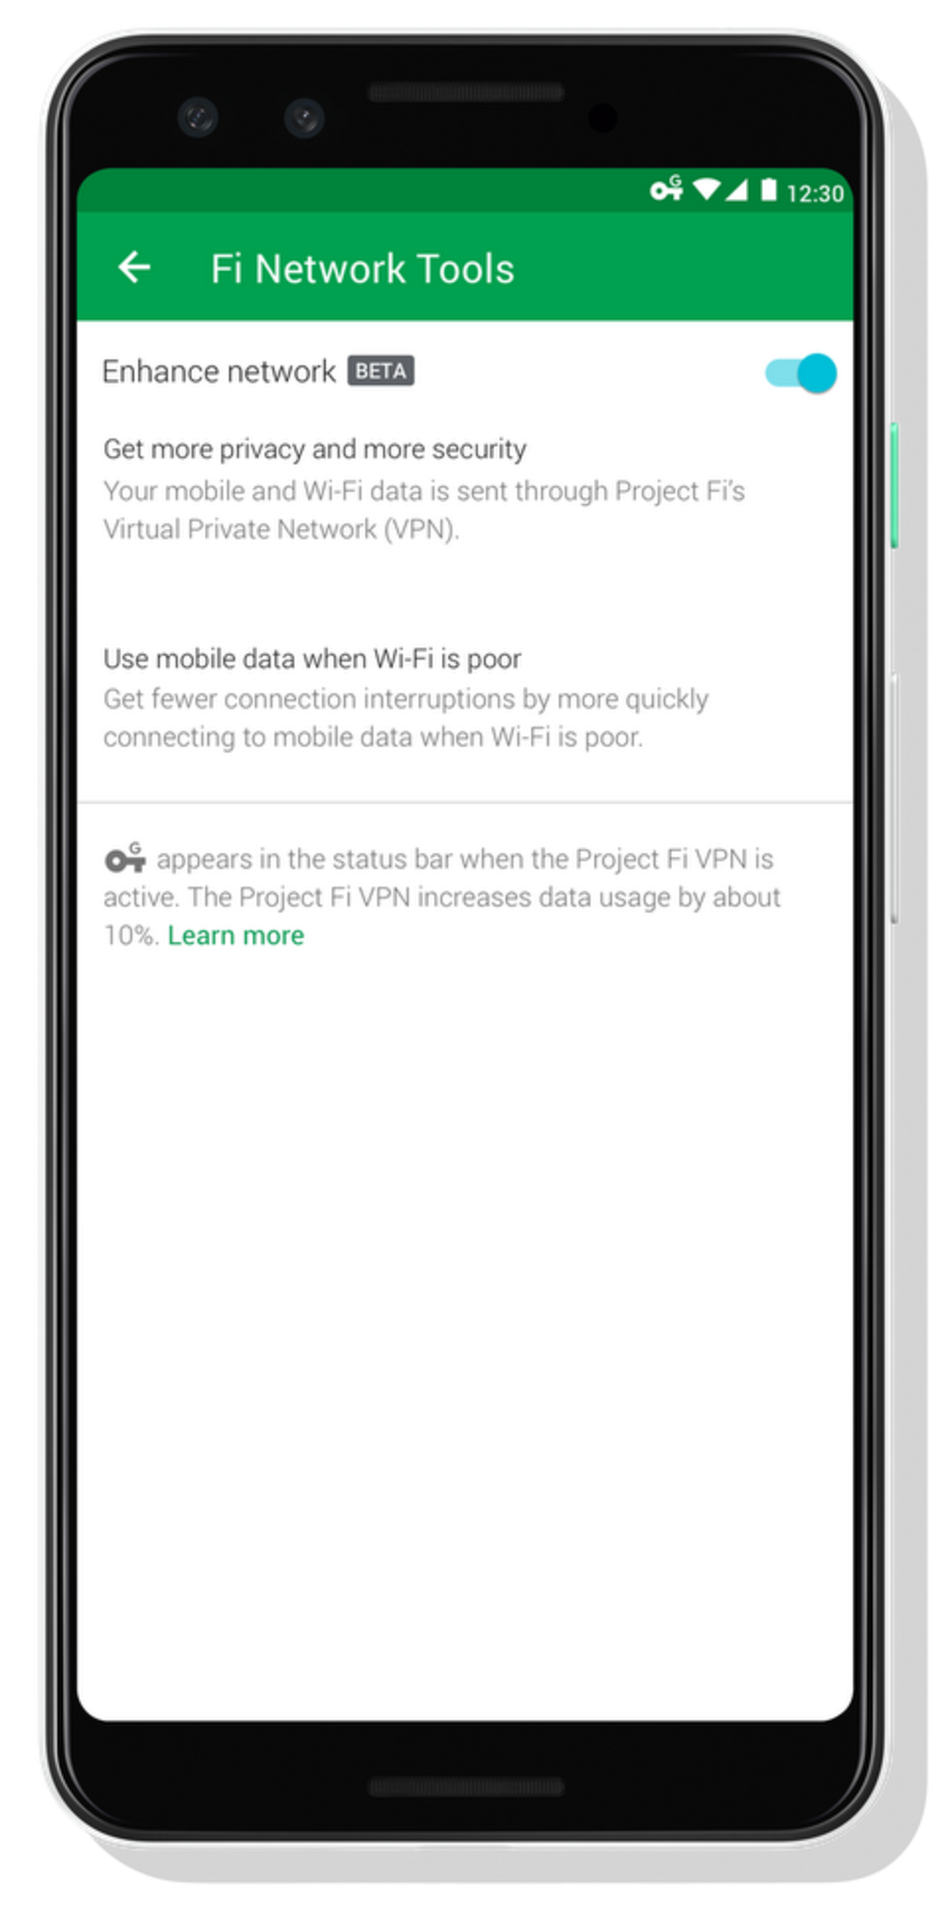 Google promises enhanced network security, faster connections on Project Fi